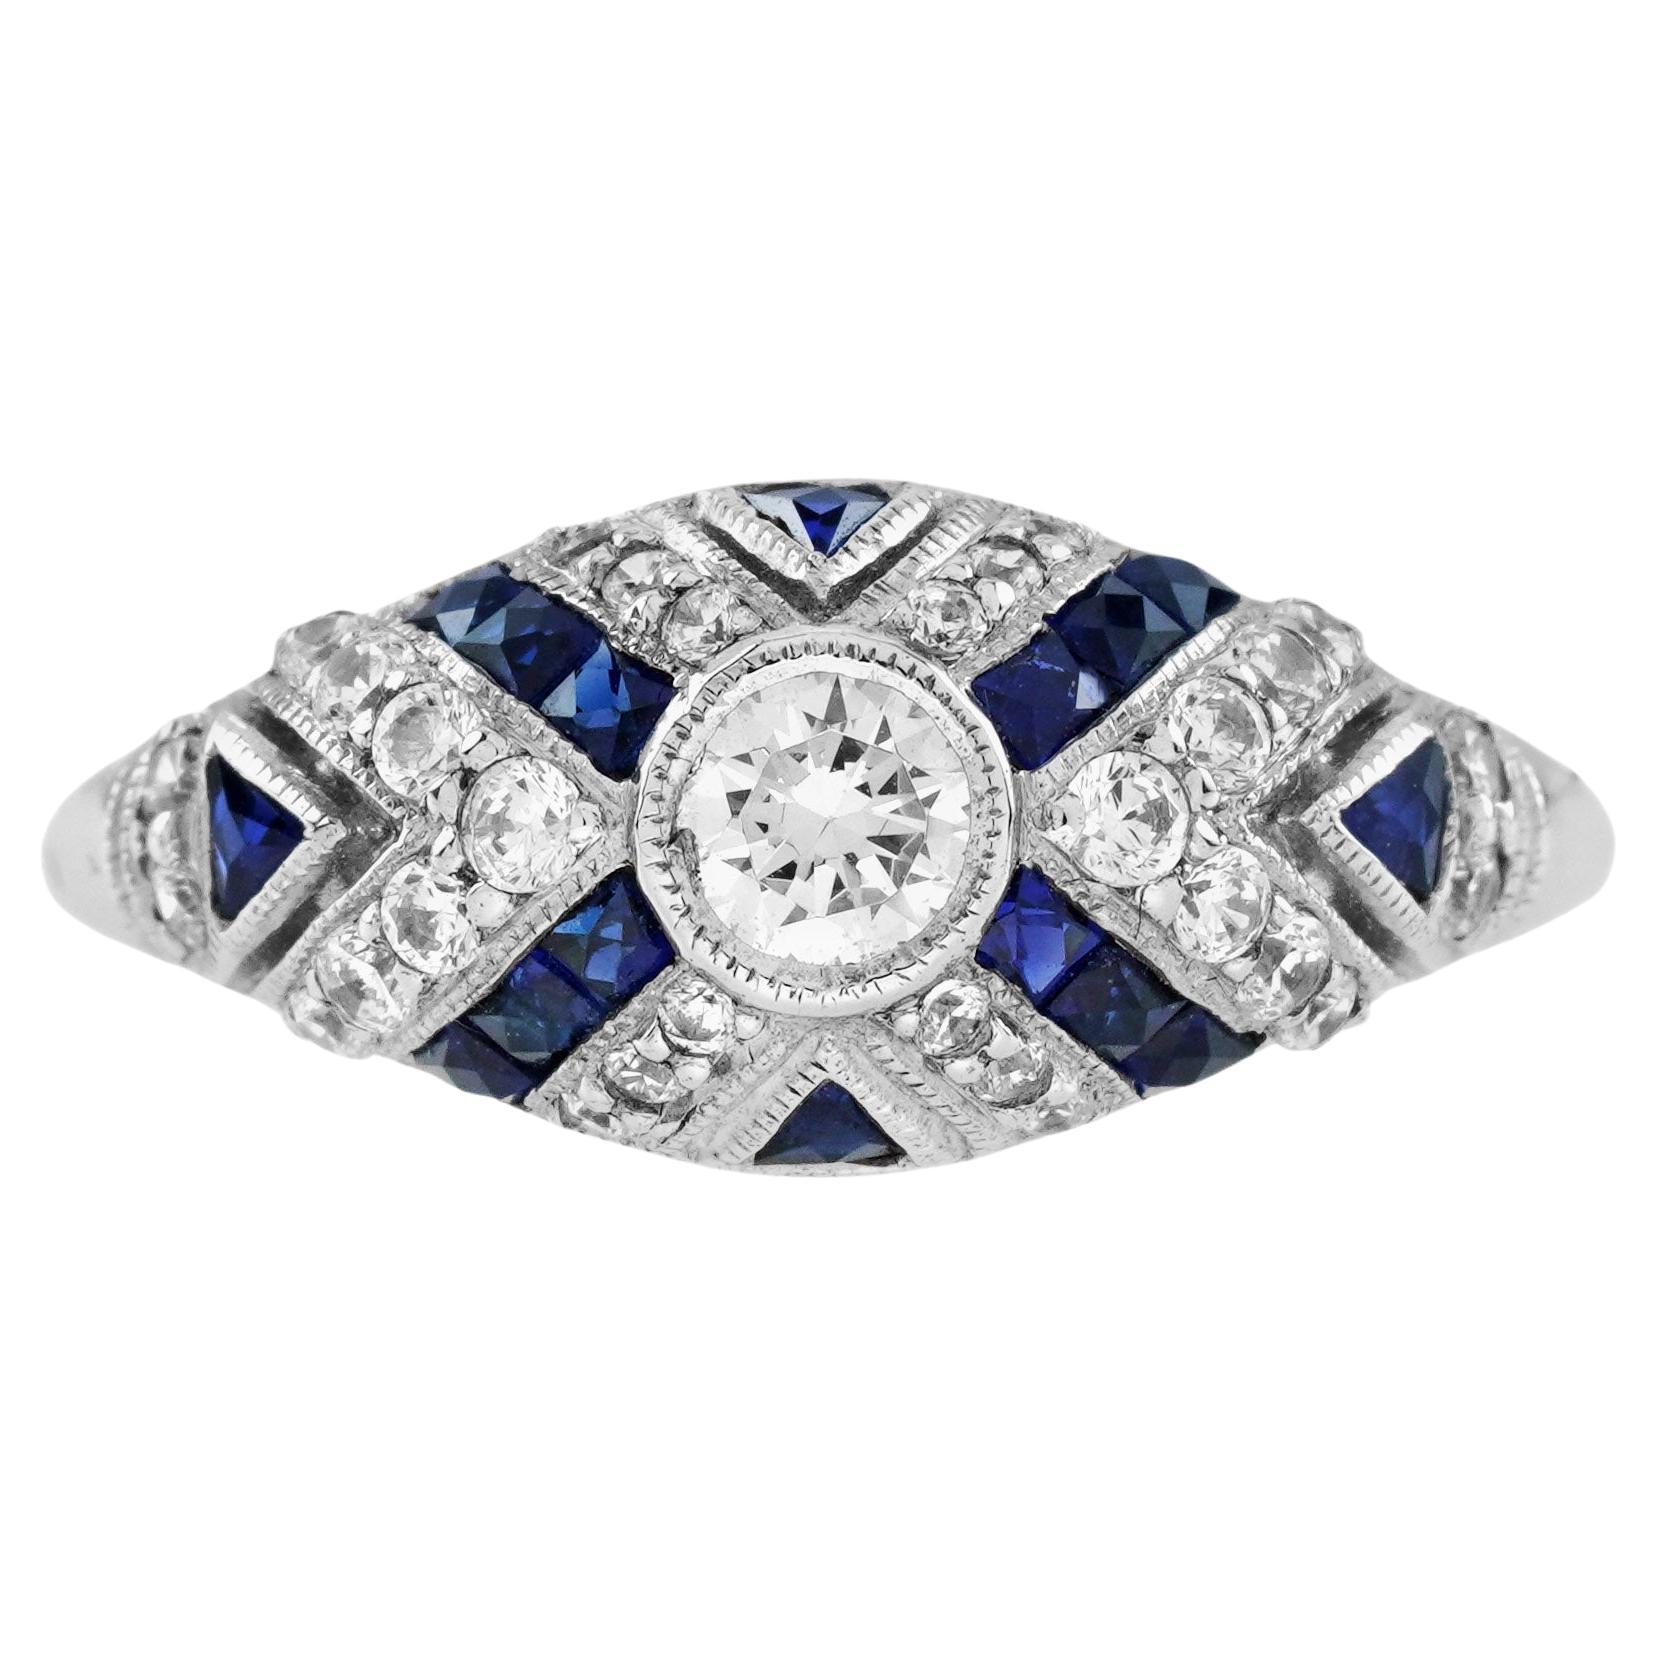 Diamond and Blue Sapphire Art Deco Style Engagement Ring in 18K White Gold